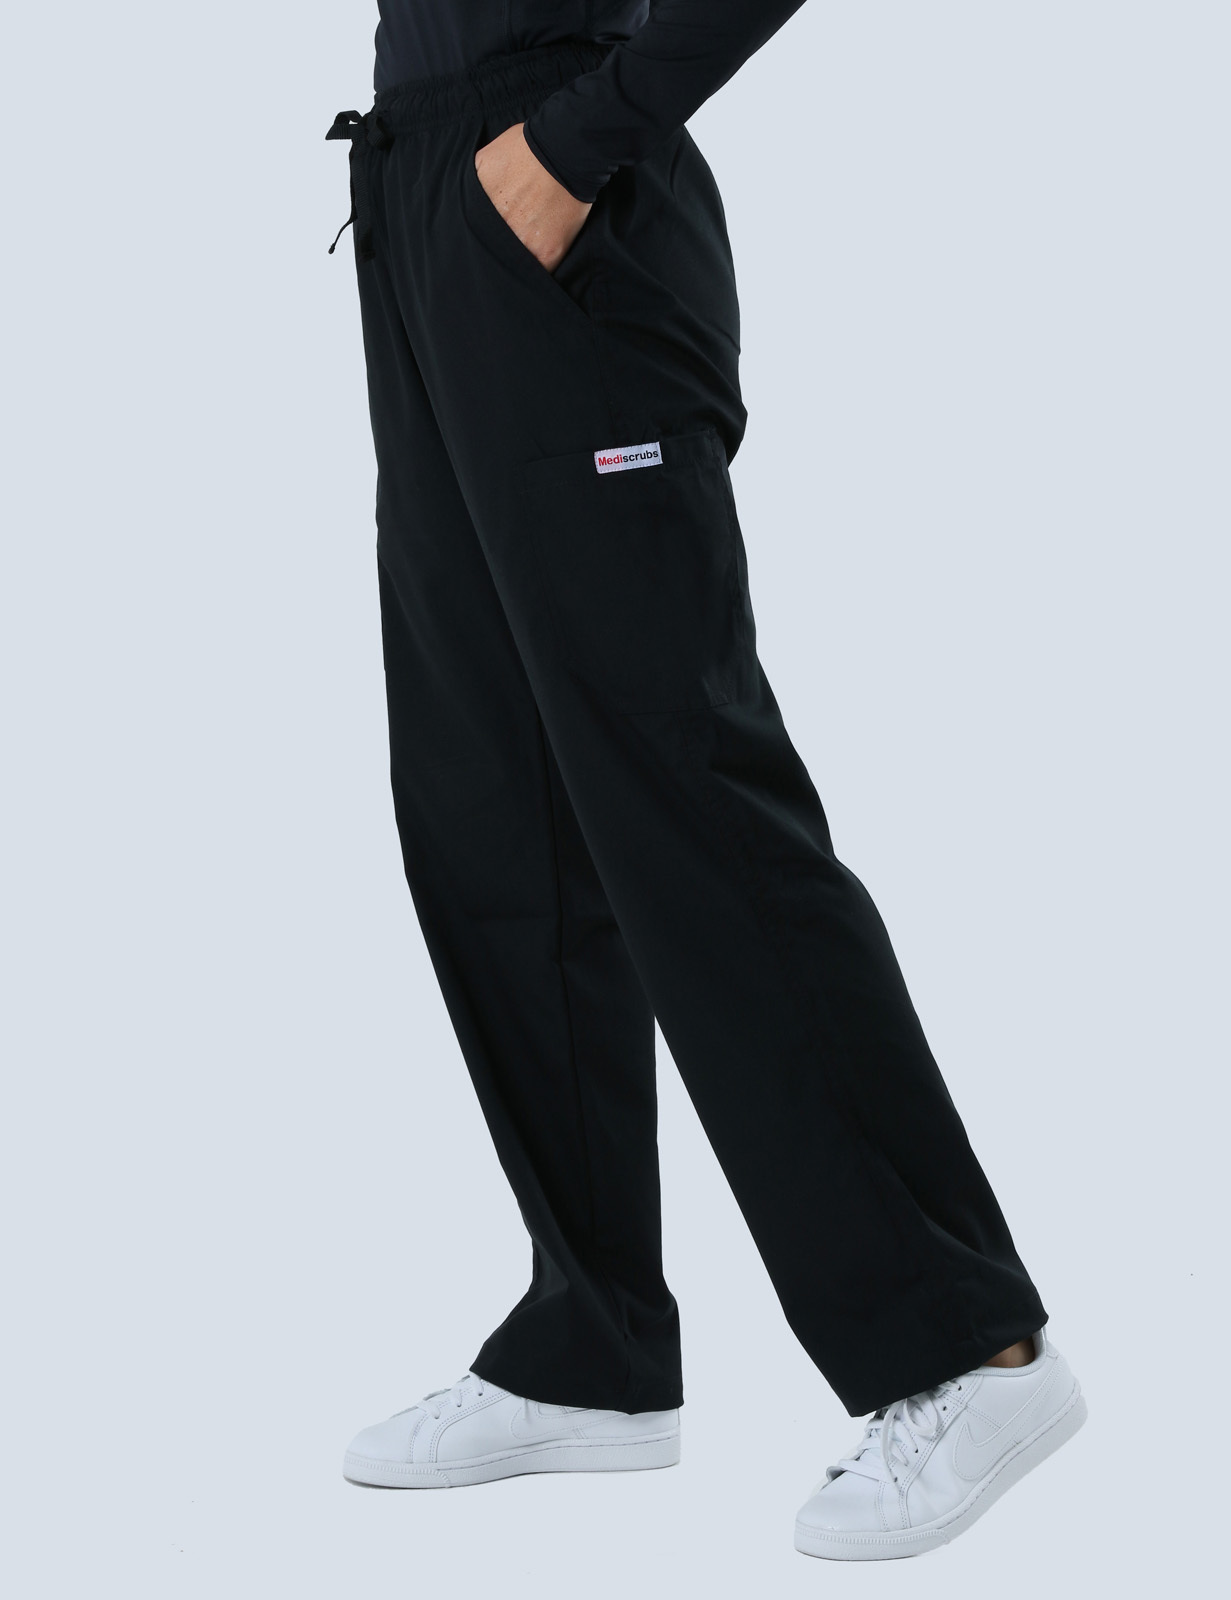 Redcliffe Hospital - Medical/Stroke Ward (Women's Fit Spandex Scrub Top and Cargo Pants in Black incl Logos)